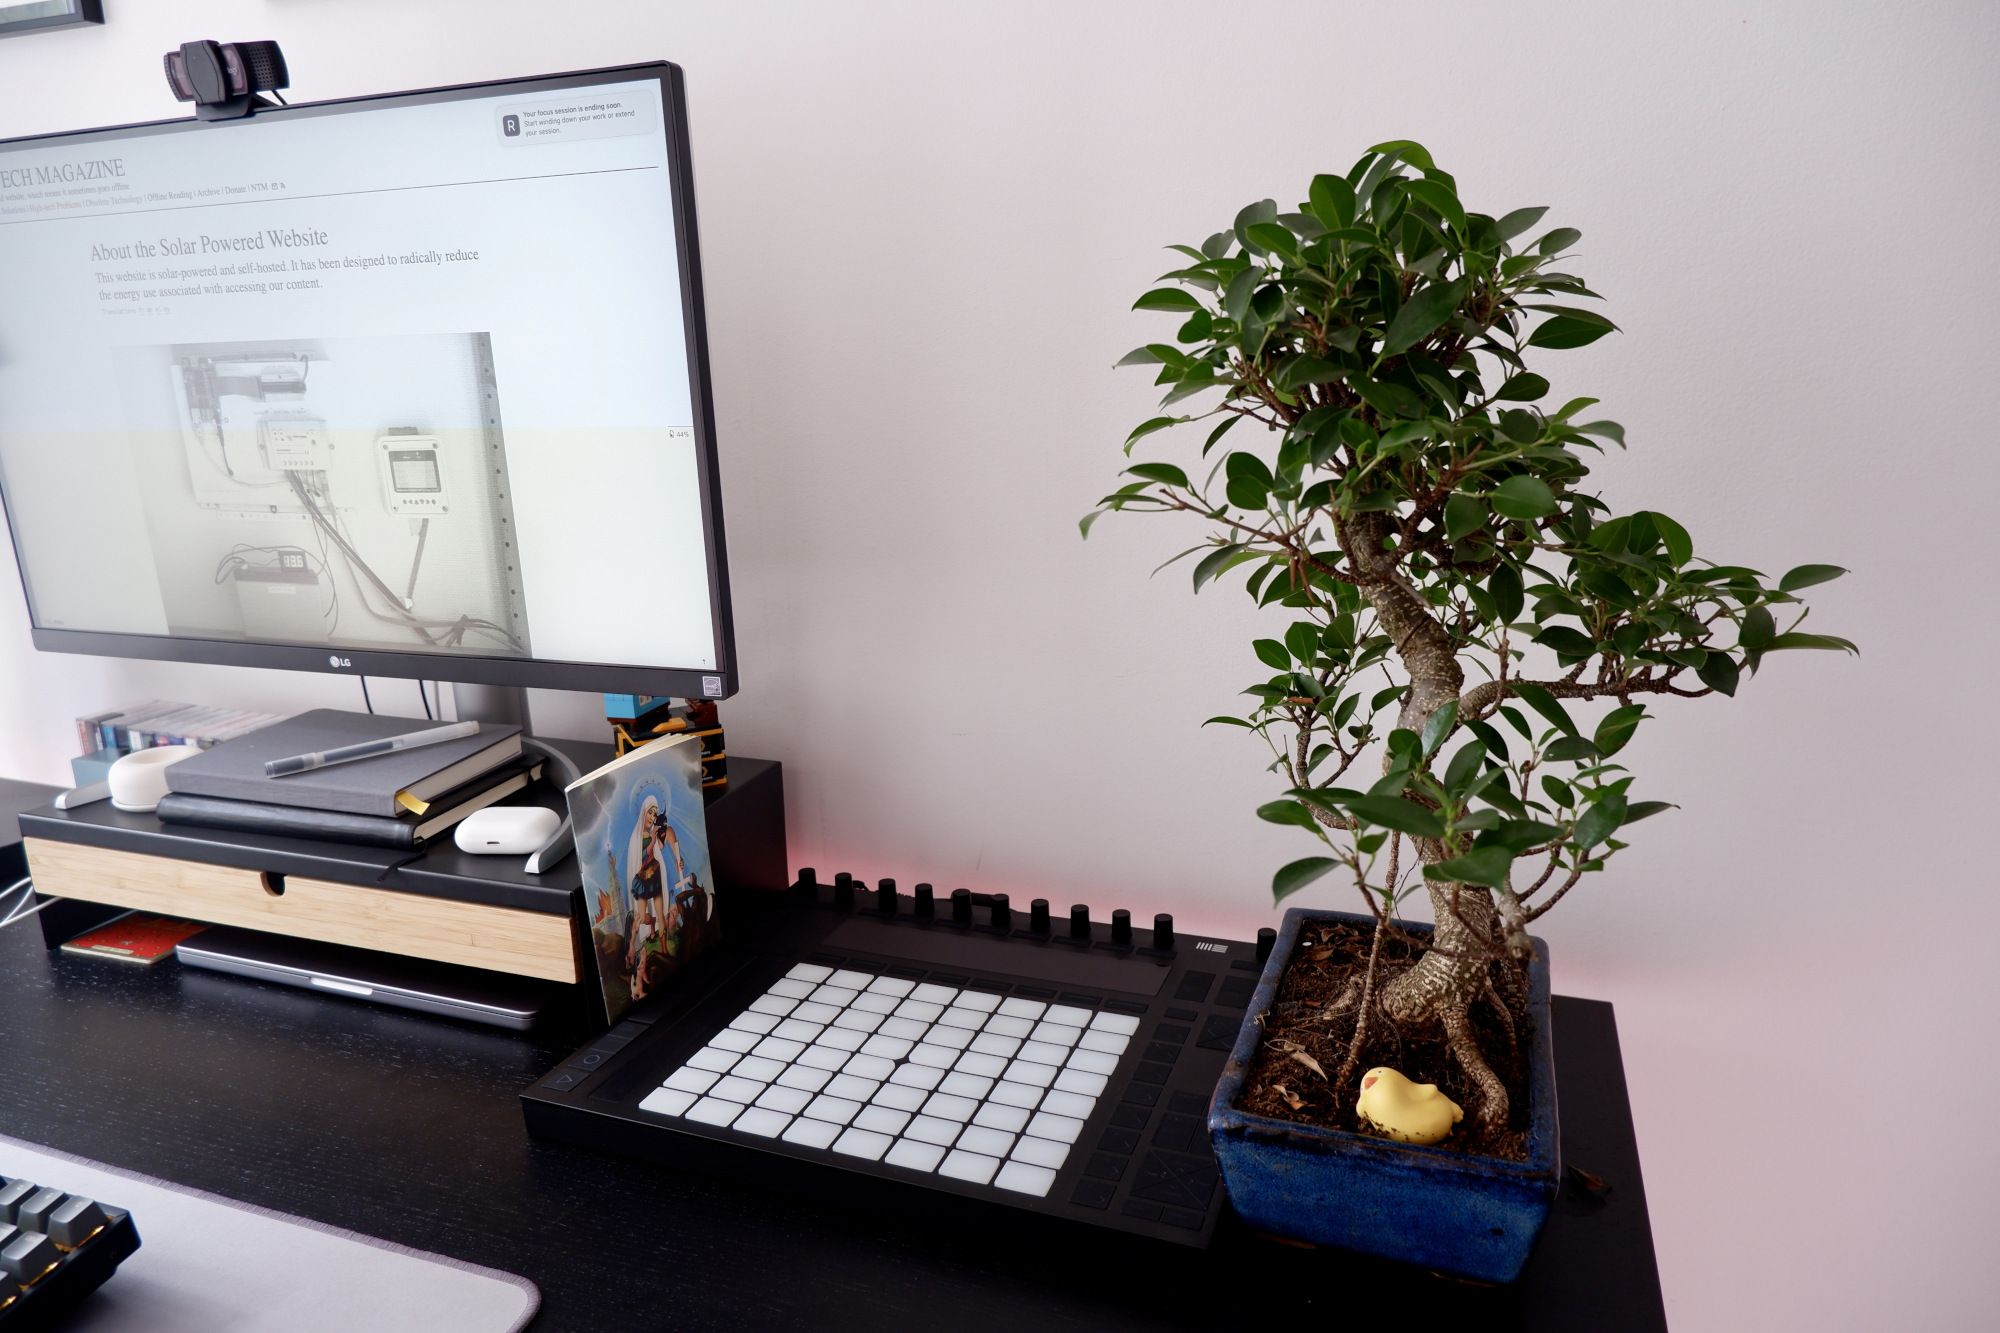 Angled photo of the desk, with a plant visible standing on it